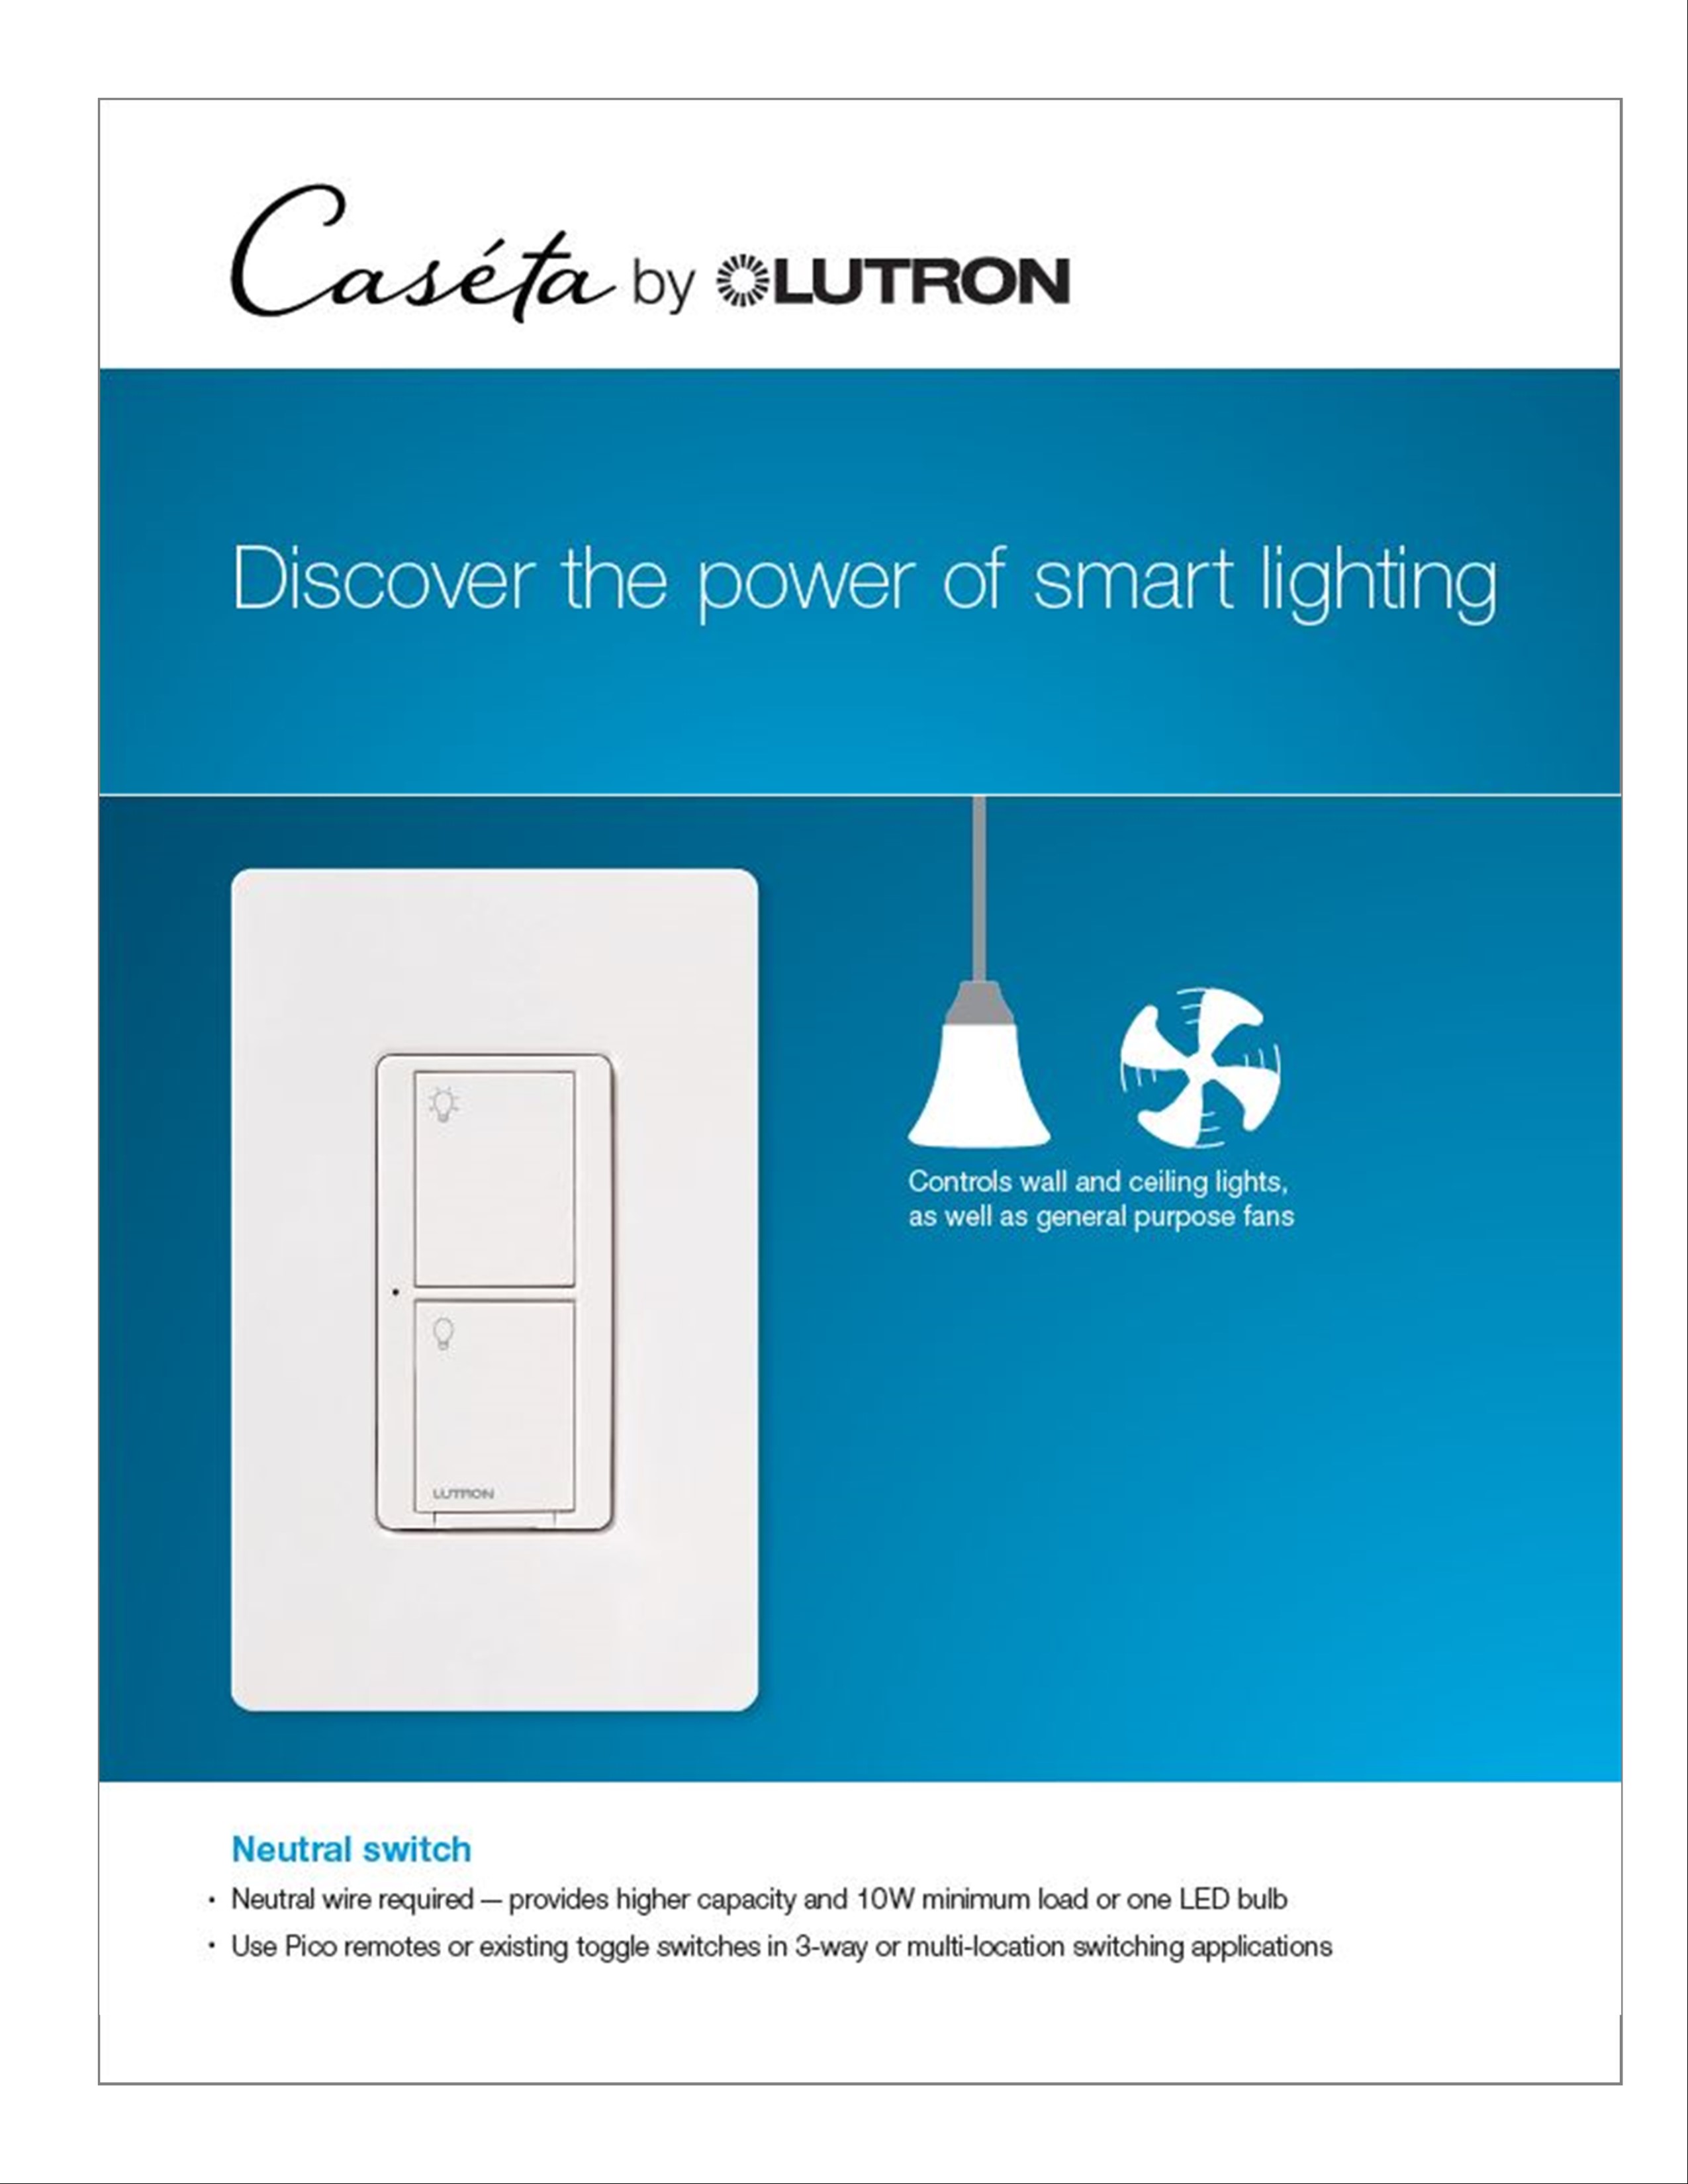 Lutron New Products